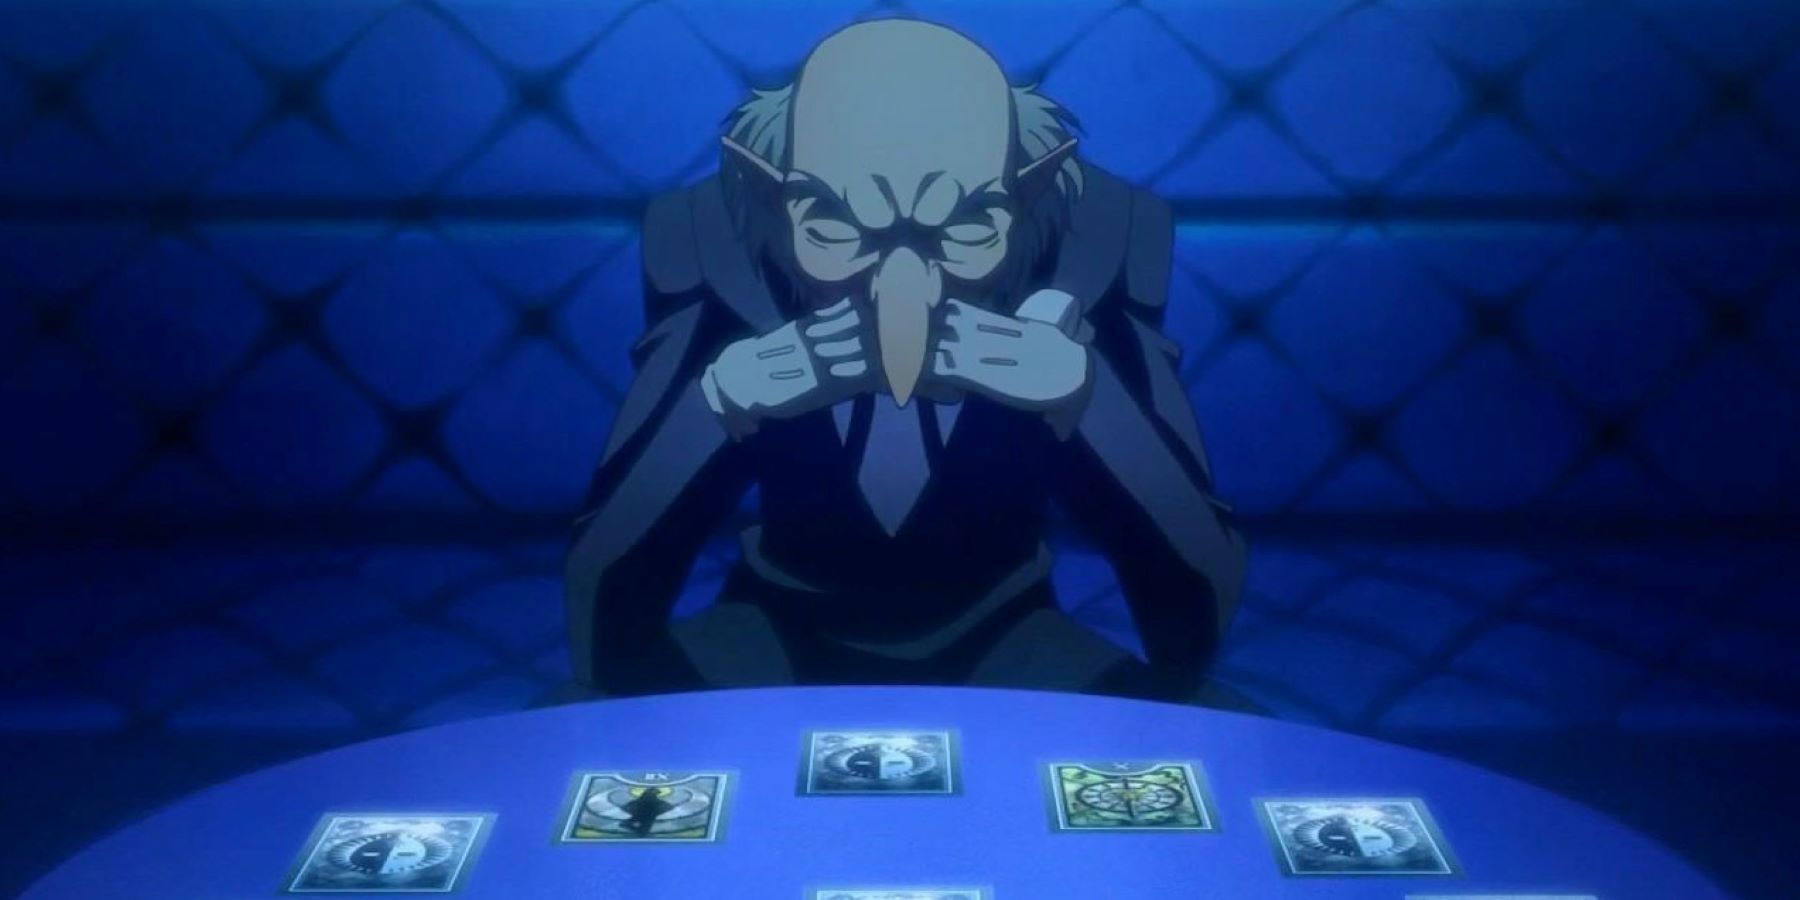 Igor looking at tarot cards in the Velvet Room in a Persona cutscene